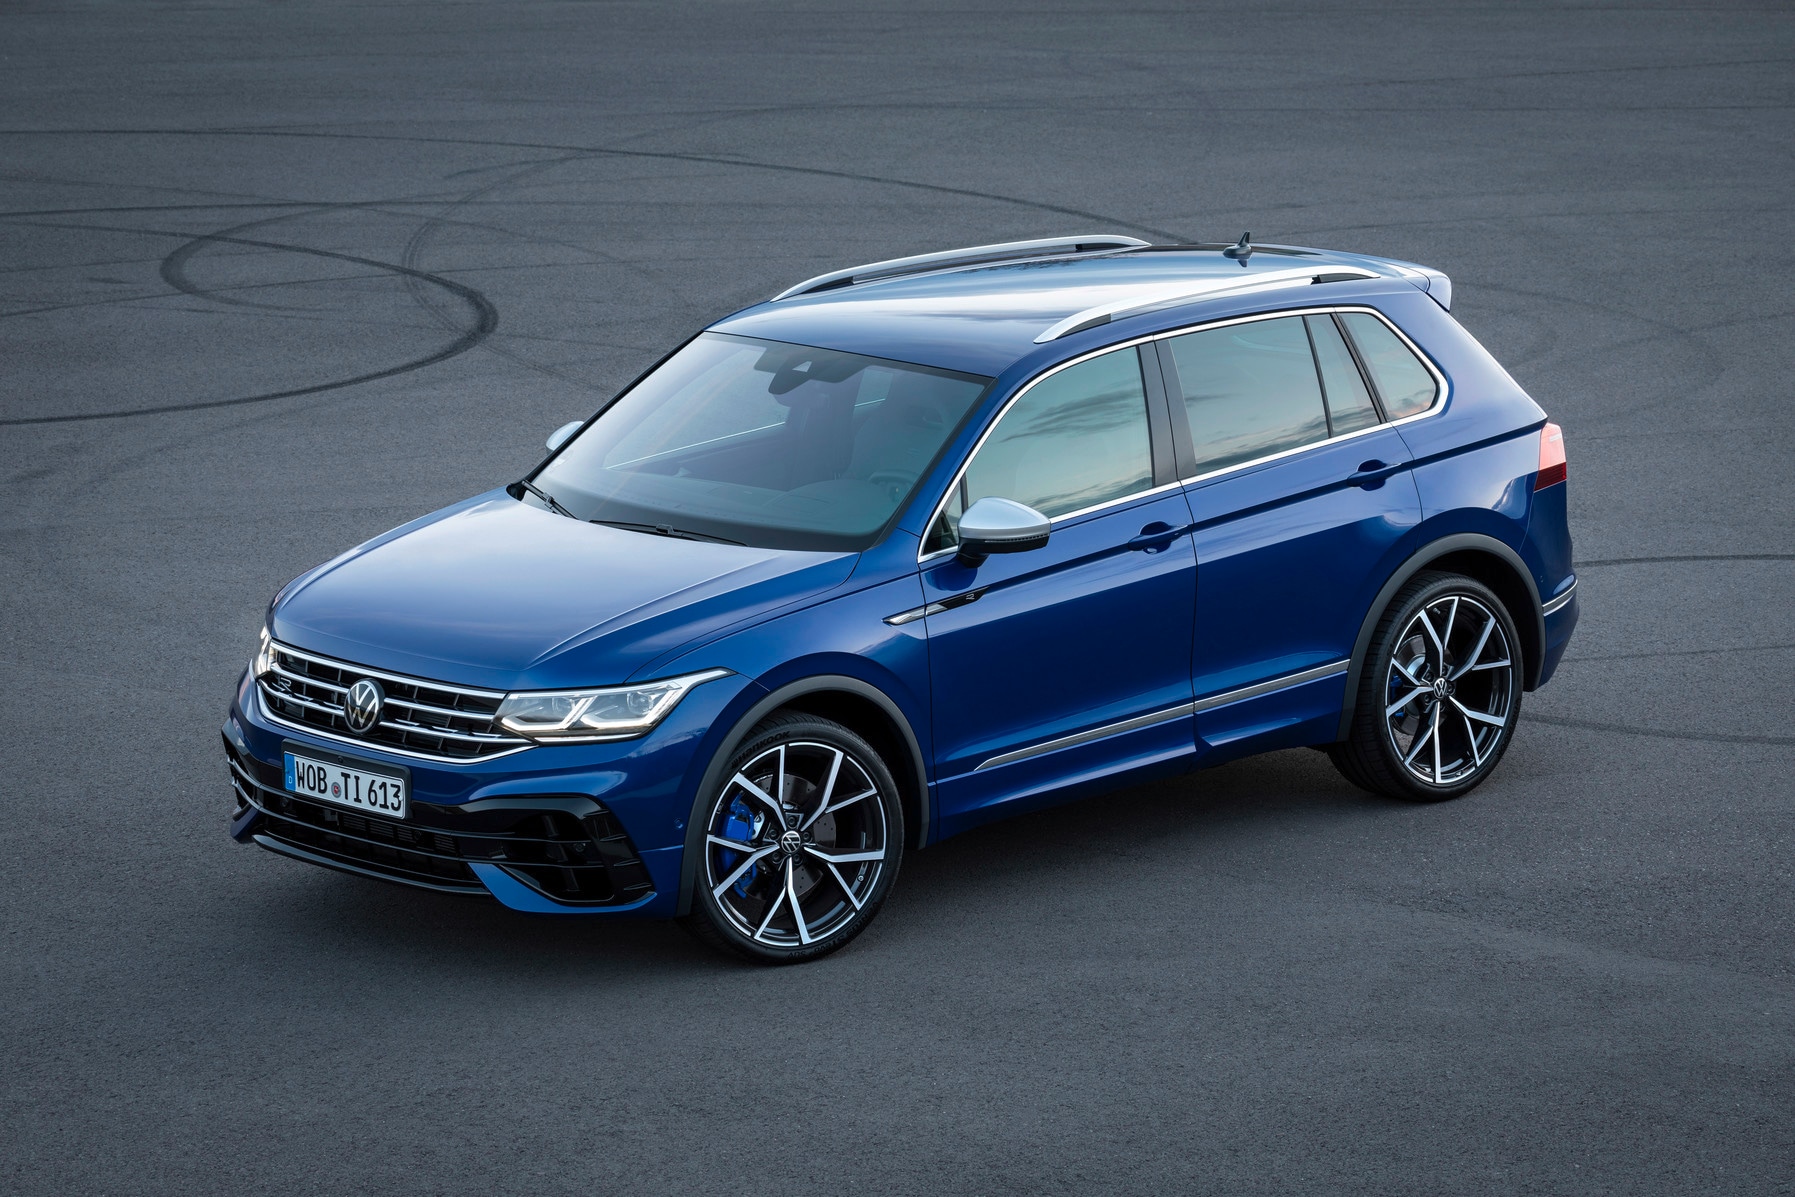 2021 Volkswagen Tiguan R, the most powerful Tiguan ever, goes on sale